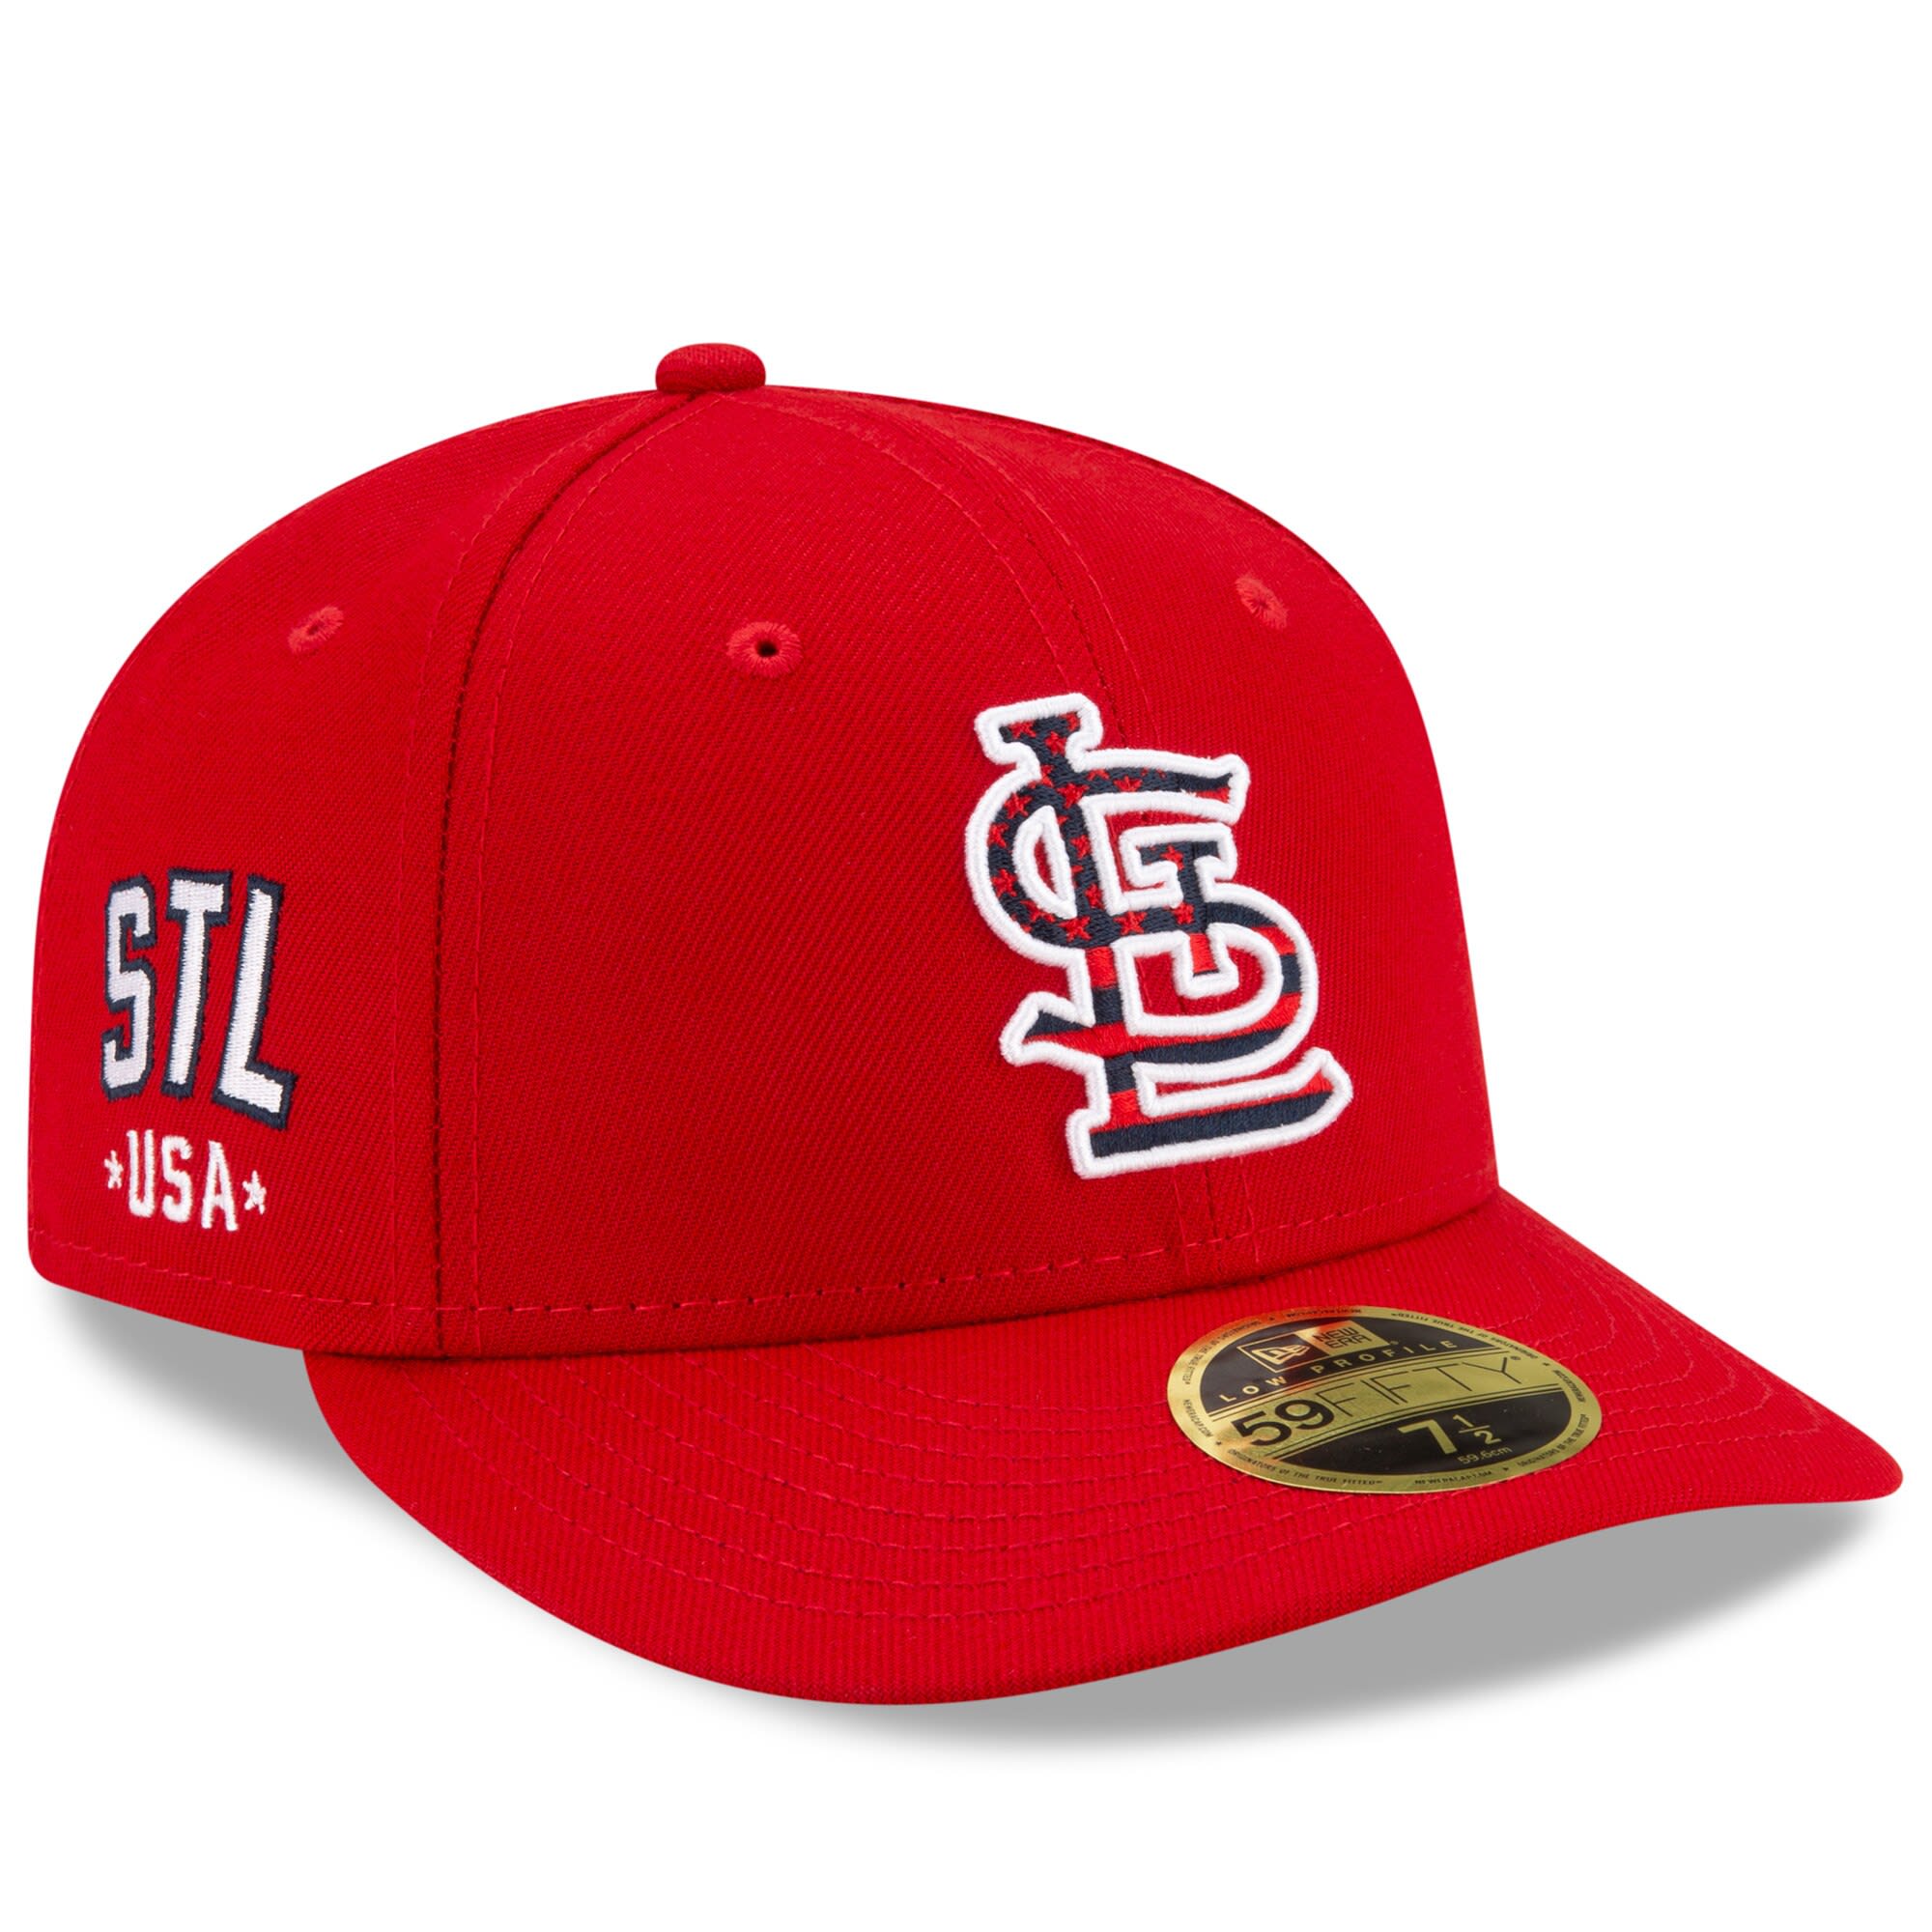 July with a new St. Louis Cardinals hat